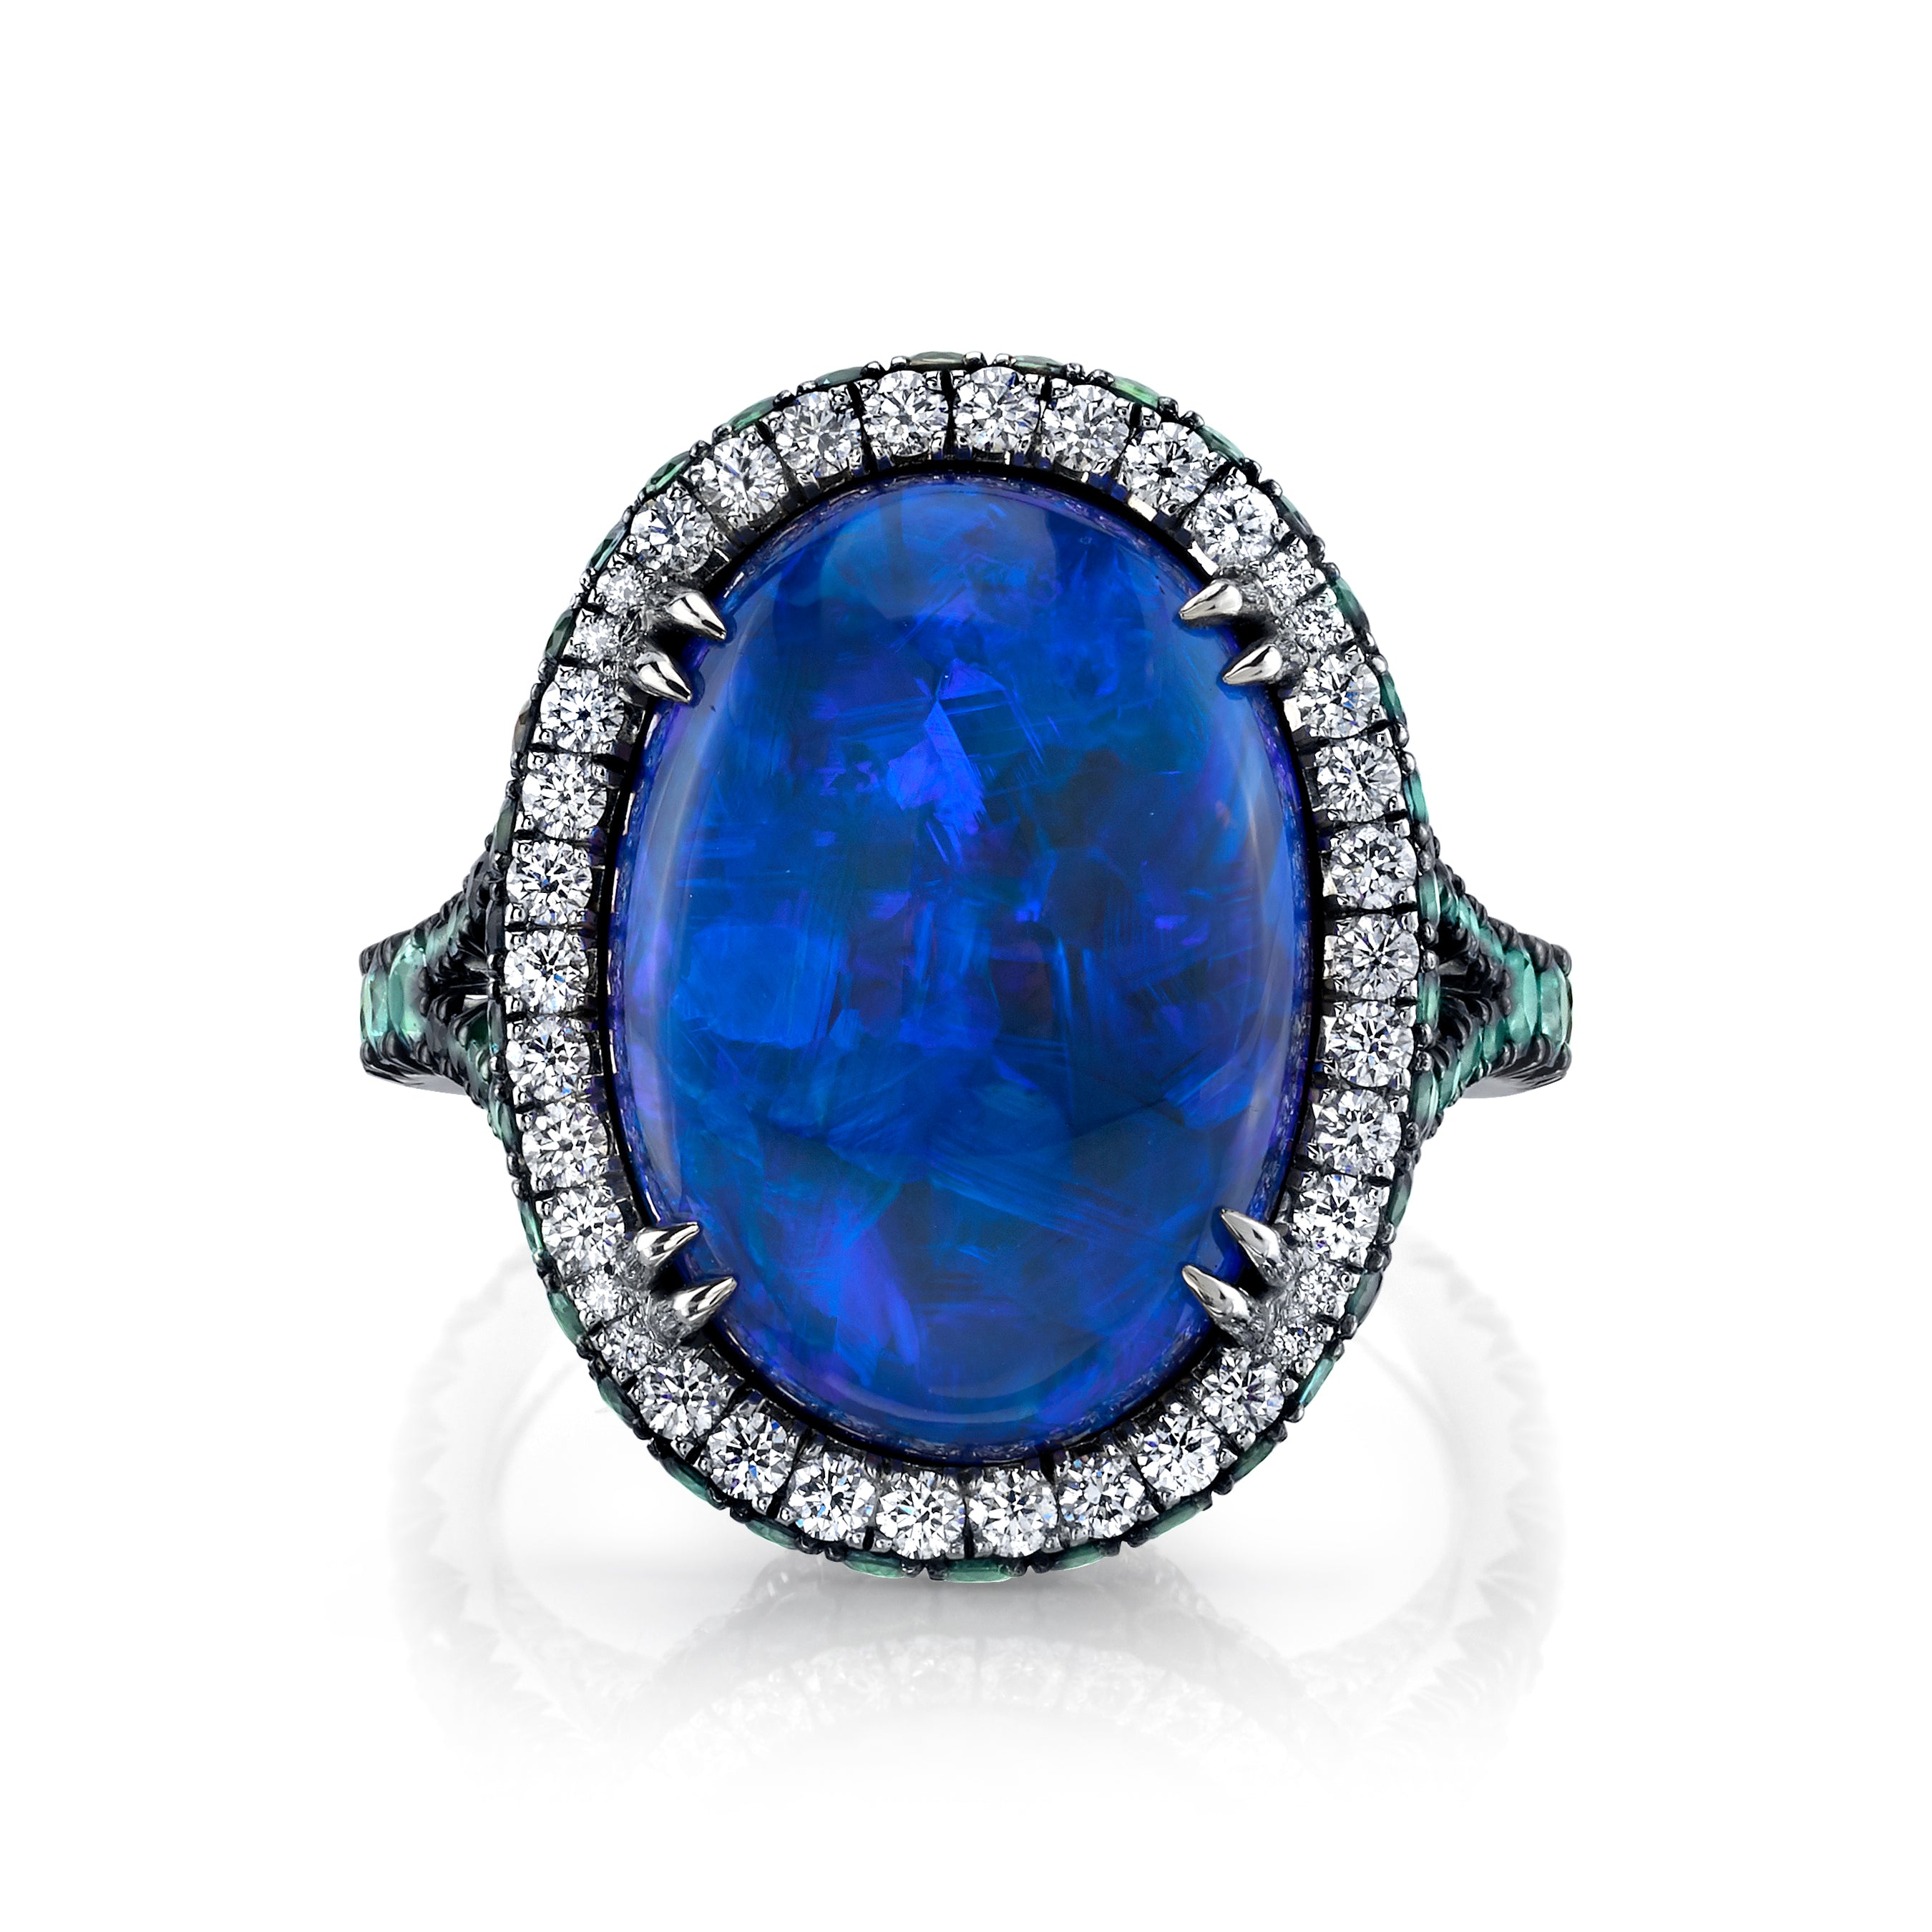 Omi Prive Platinum Oval Cabachon Opal Ring